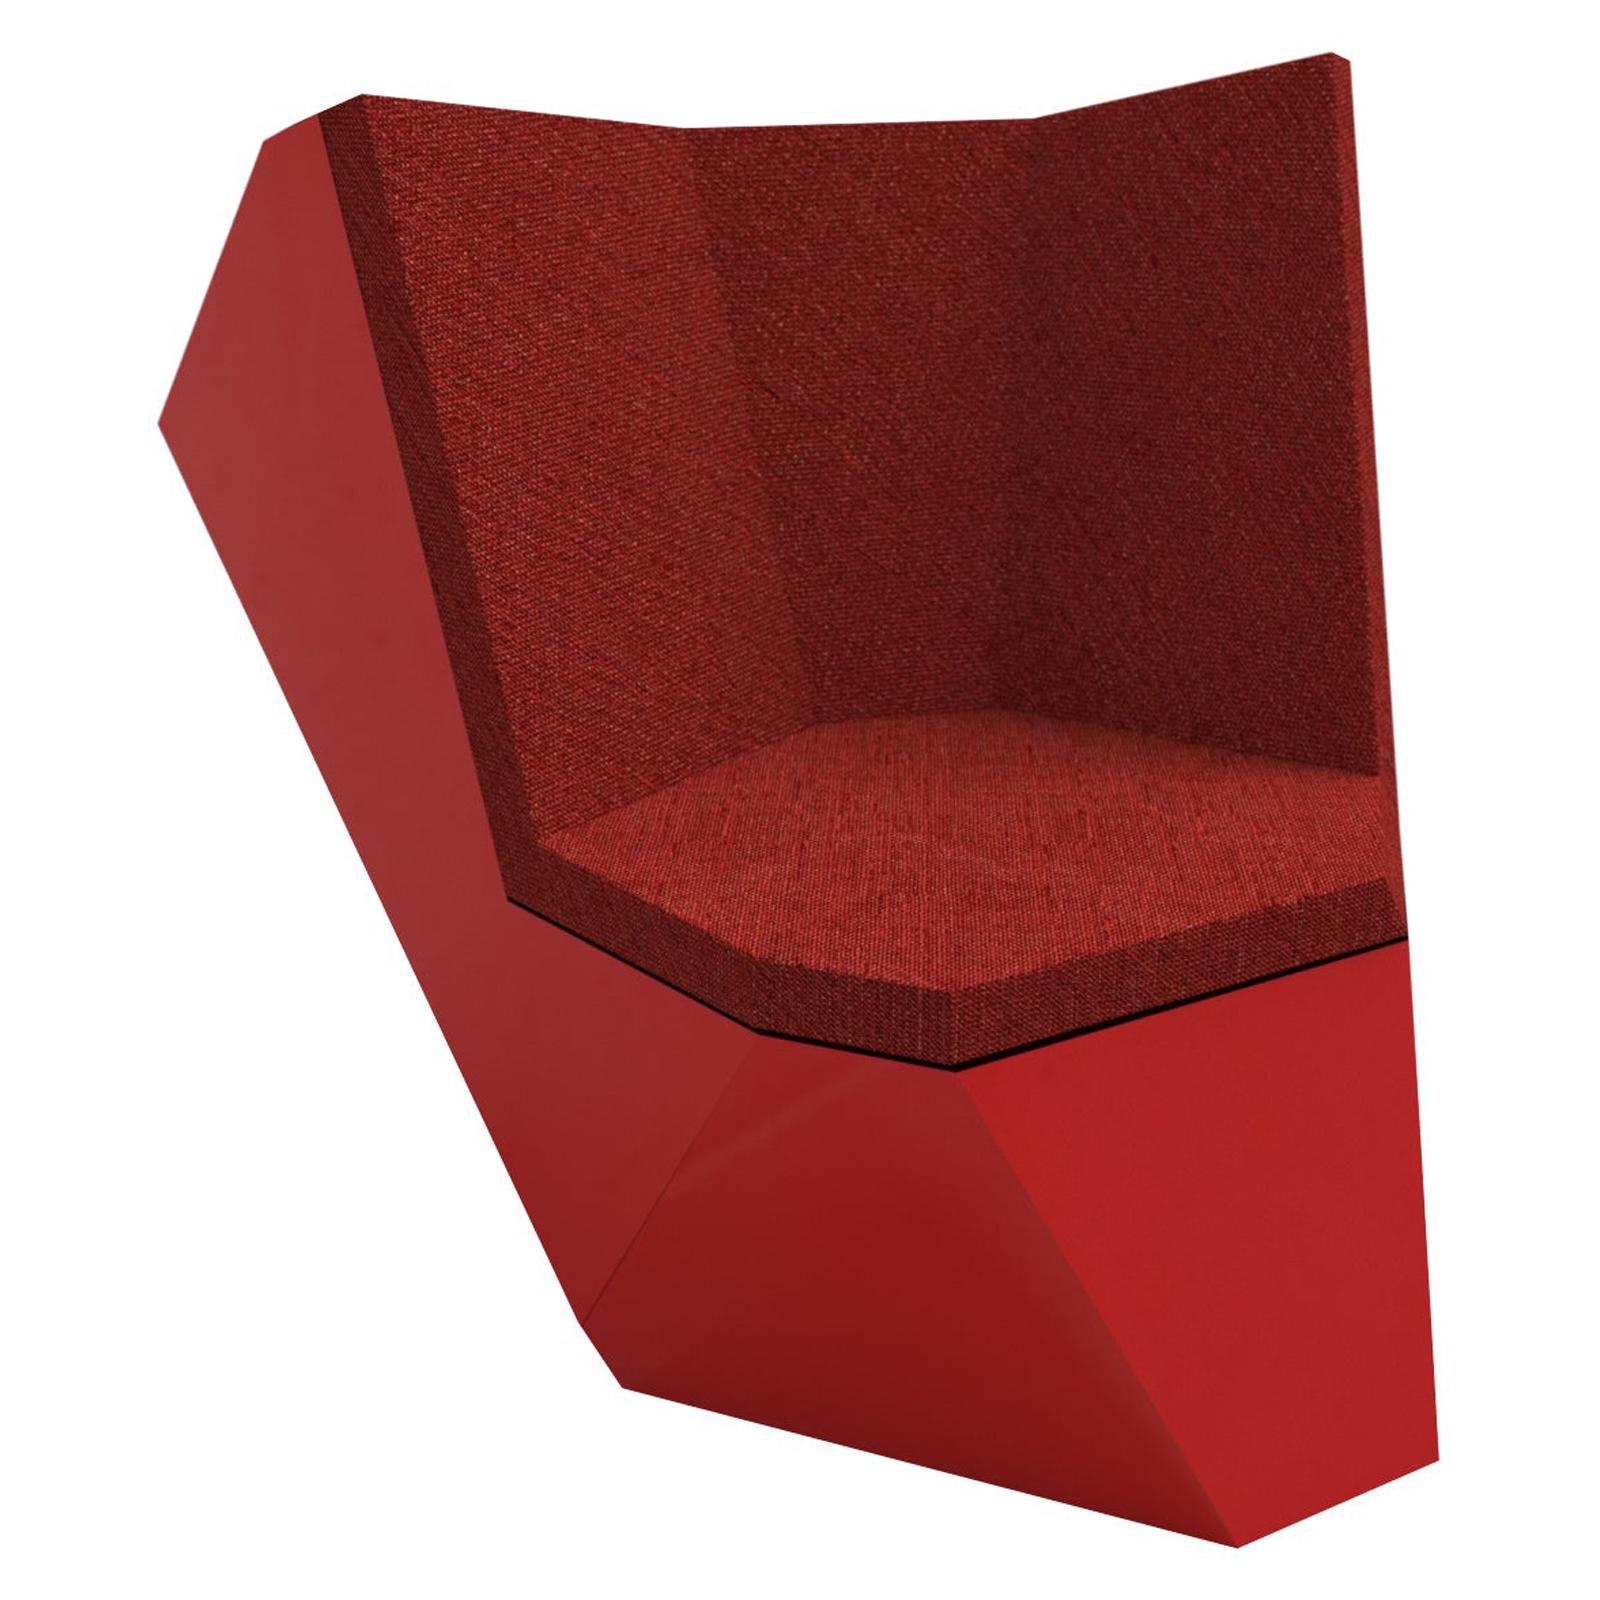 It is an armchair,

in Aluminium, for outside.

with 4 different seats inside,

you just have to roll it, and you will find a seat, higher, a lower, a deeper and a more sporty one, all together,

one for each face of the stone!

Similar,